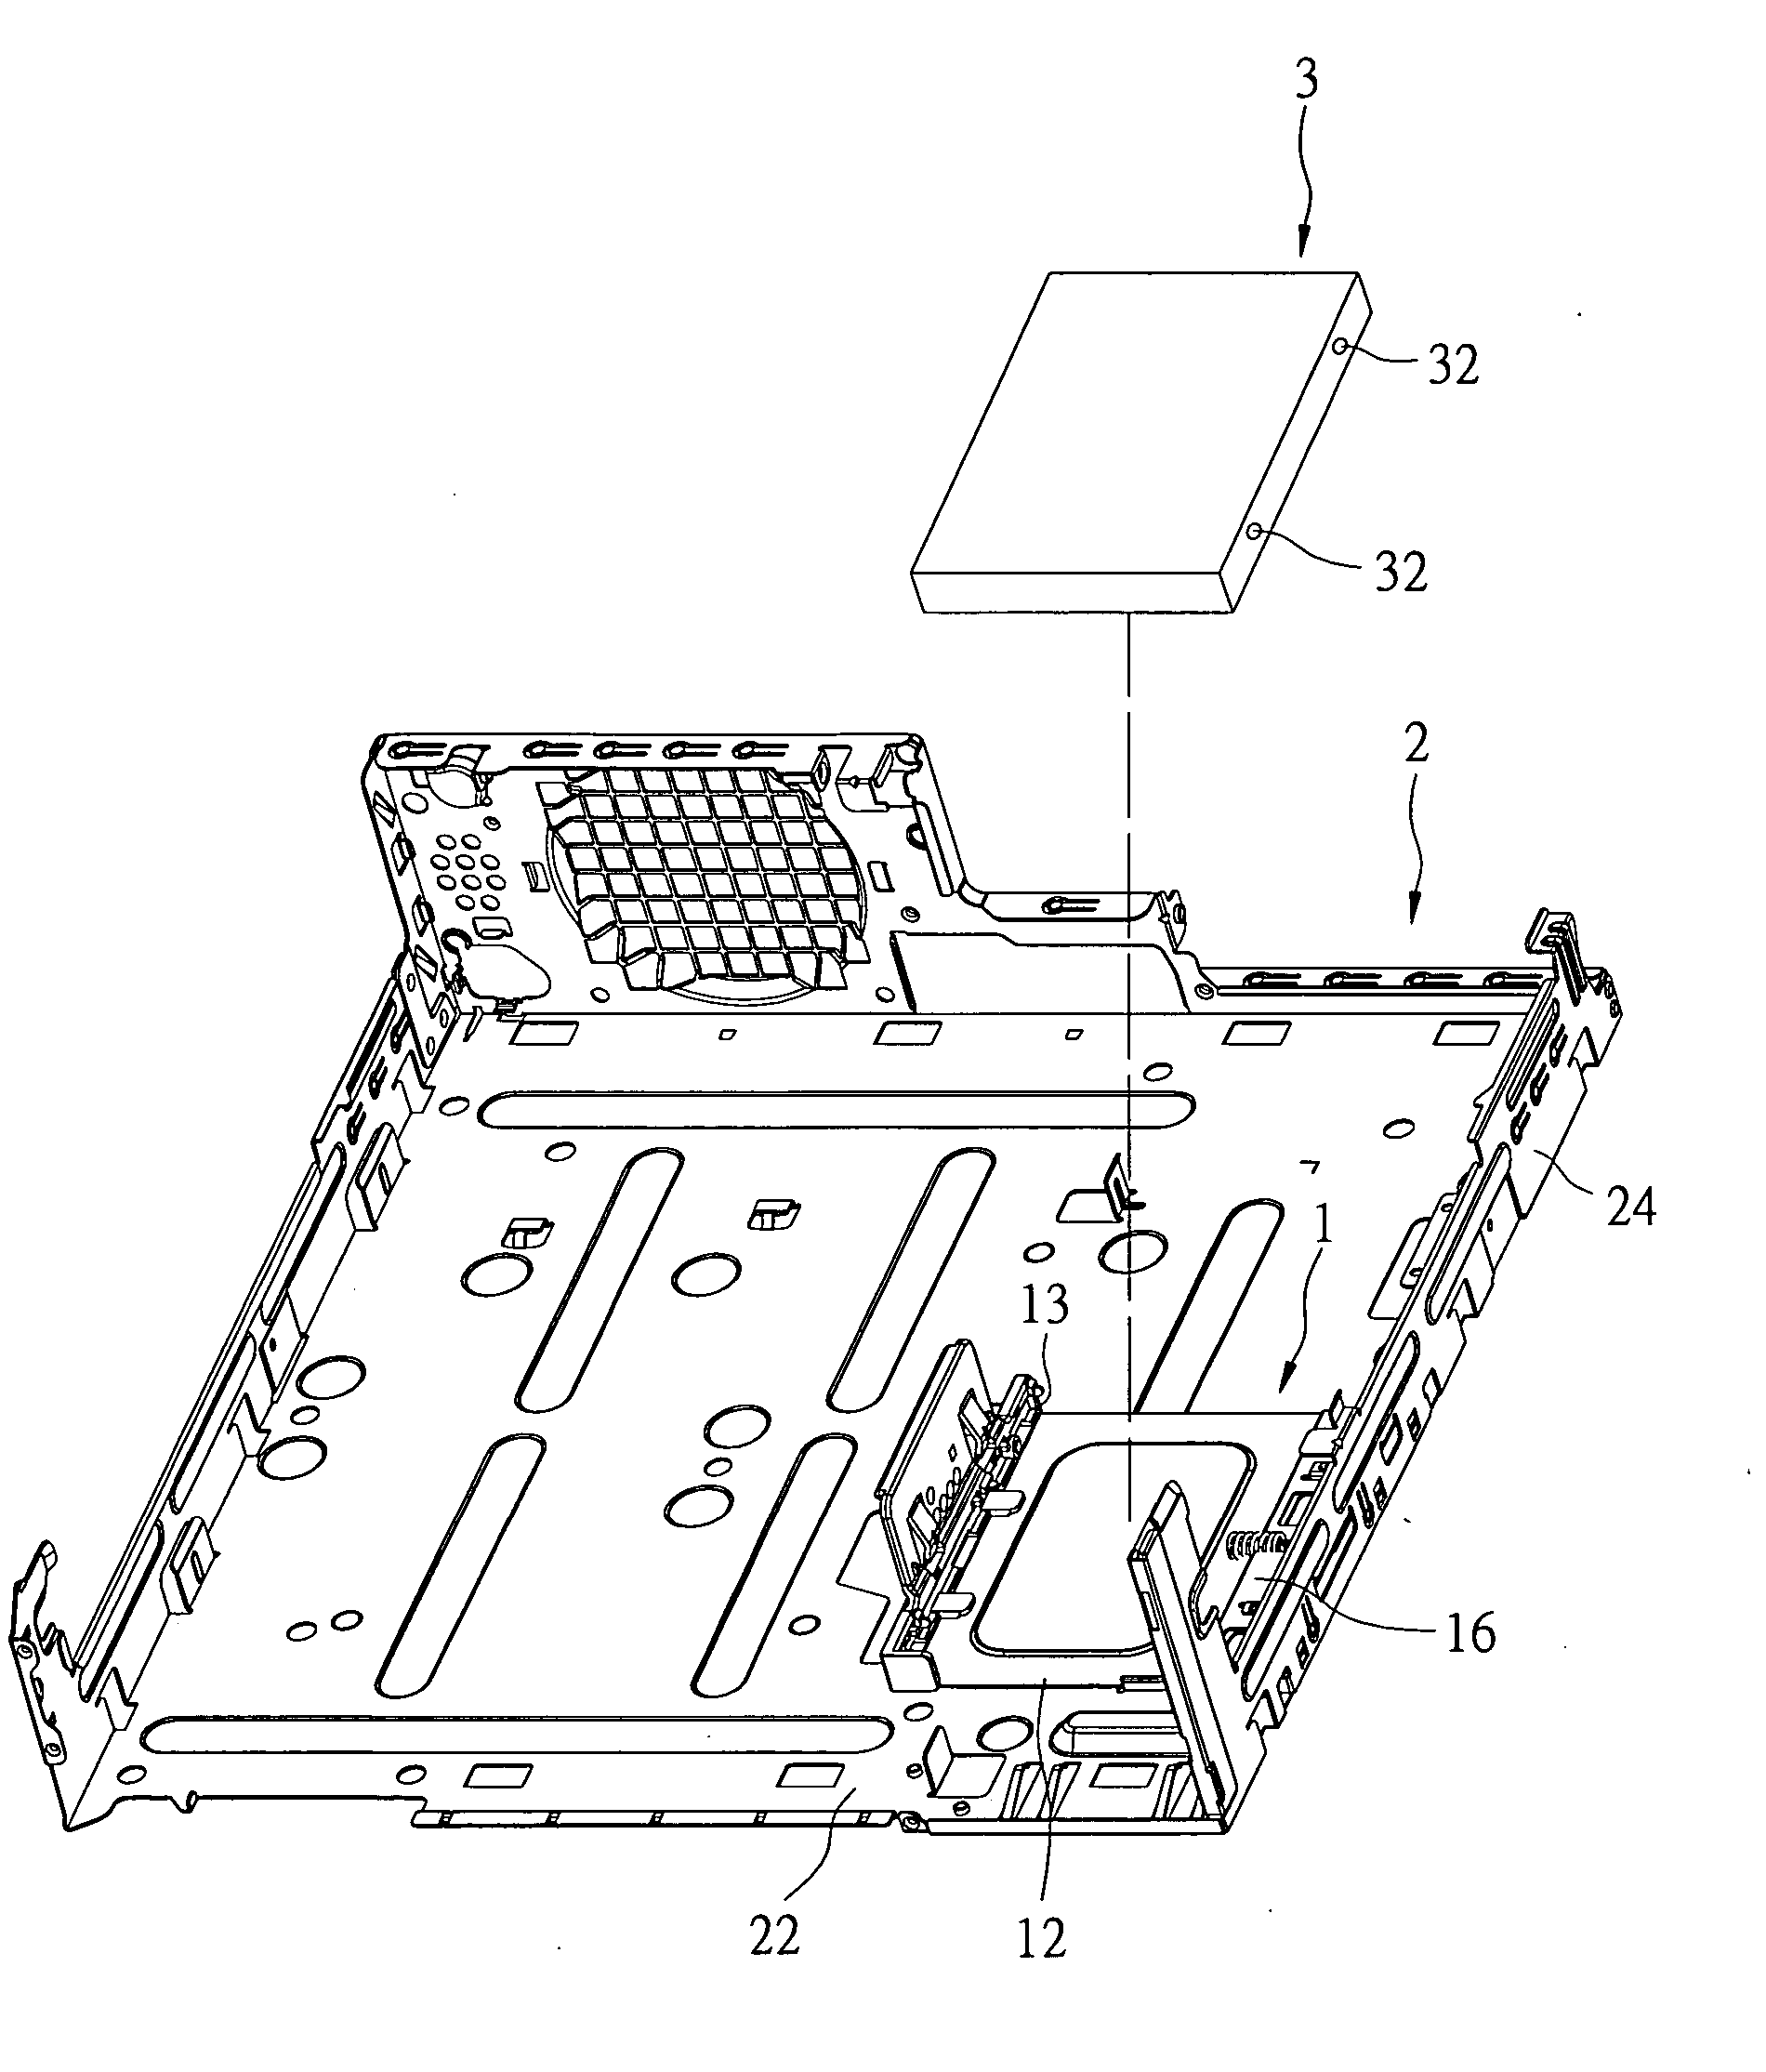 Retaining modular mechanism for a hard disk and a modular frame thereof